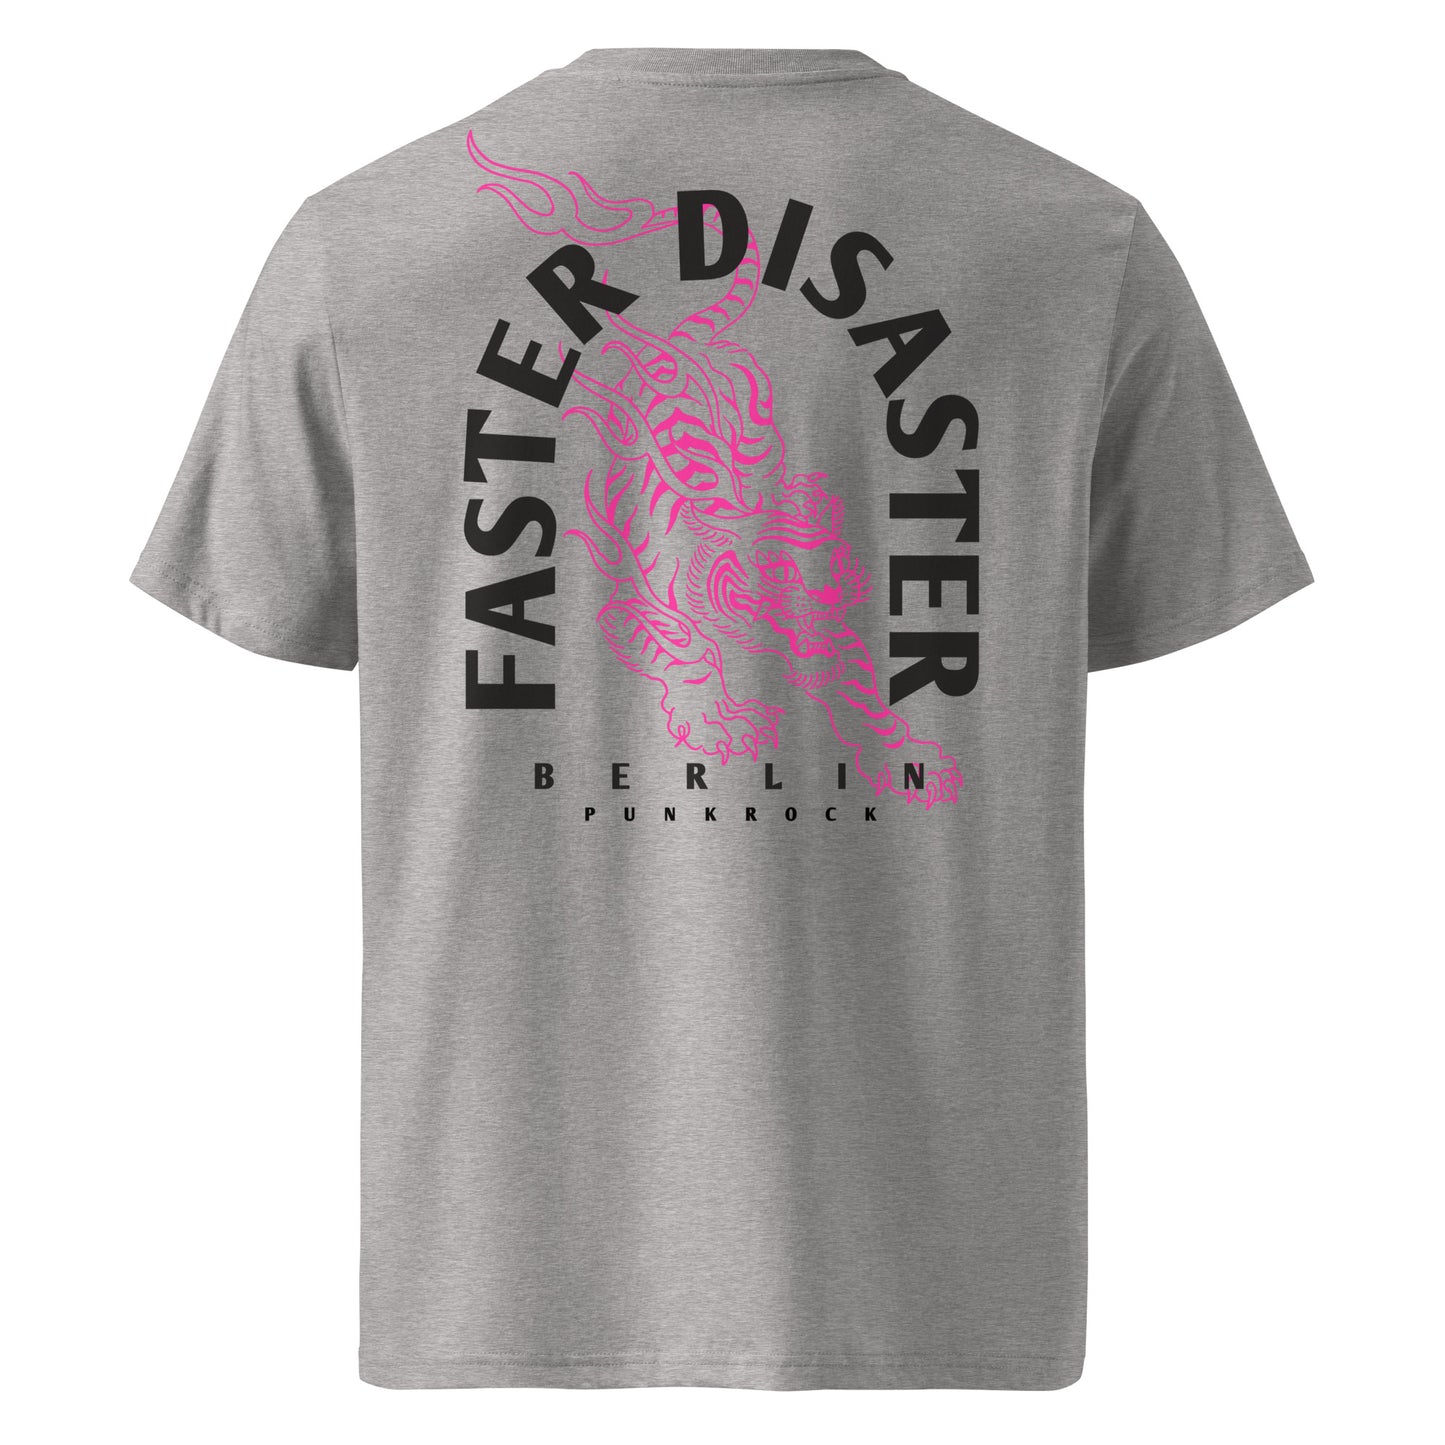 FASTER DISASTER - FLAME TIGER // Front & Backprint - Dif. Colors Unisex Organic T-Shirt